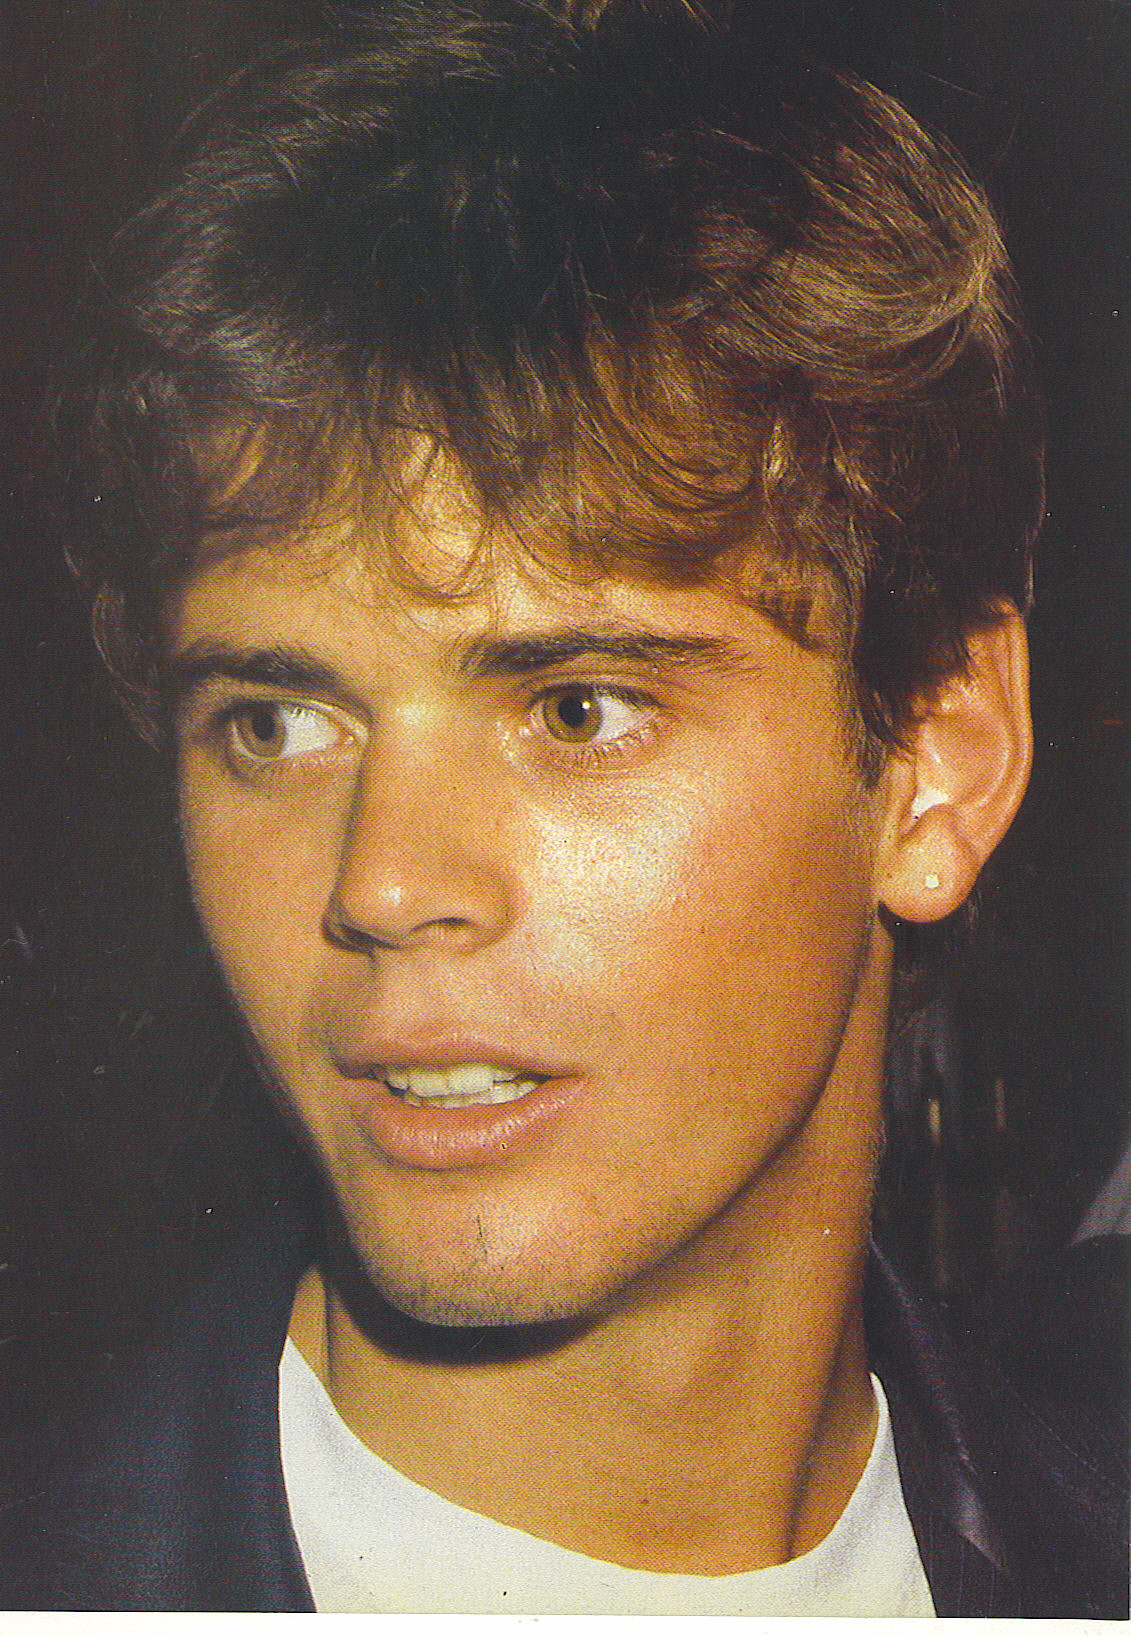 Pictures of C. Thomas Howell - Pictures Of Celebrities1131 x 1636